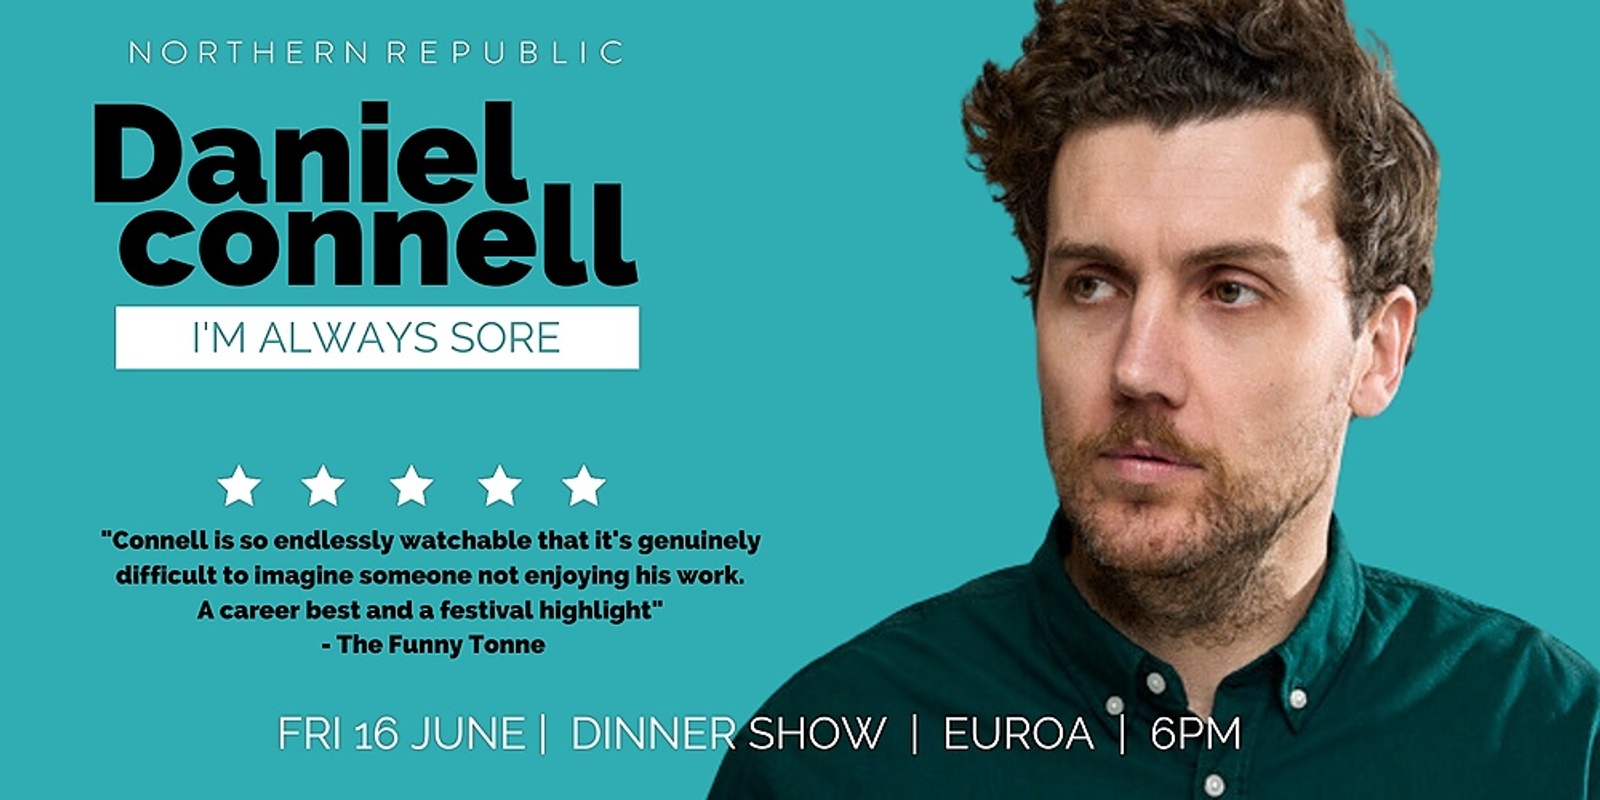 Daniel Connell LIVE at Northern Republic Euroa (Dinner Show)